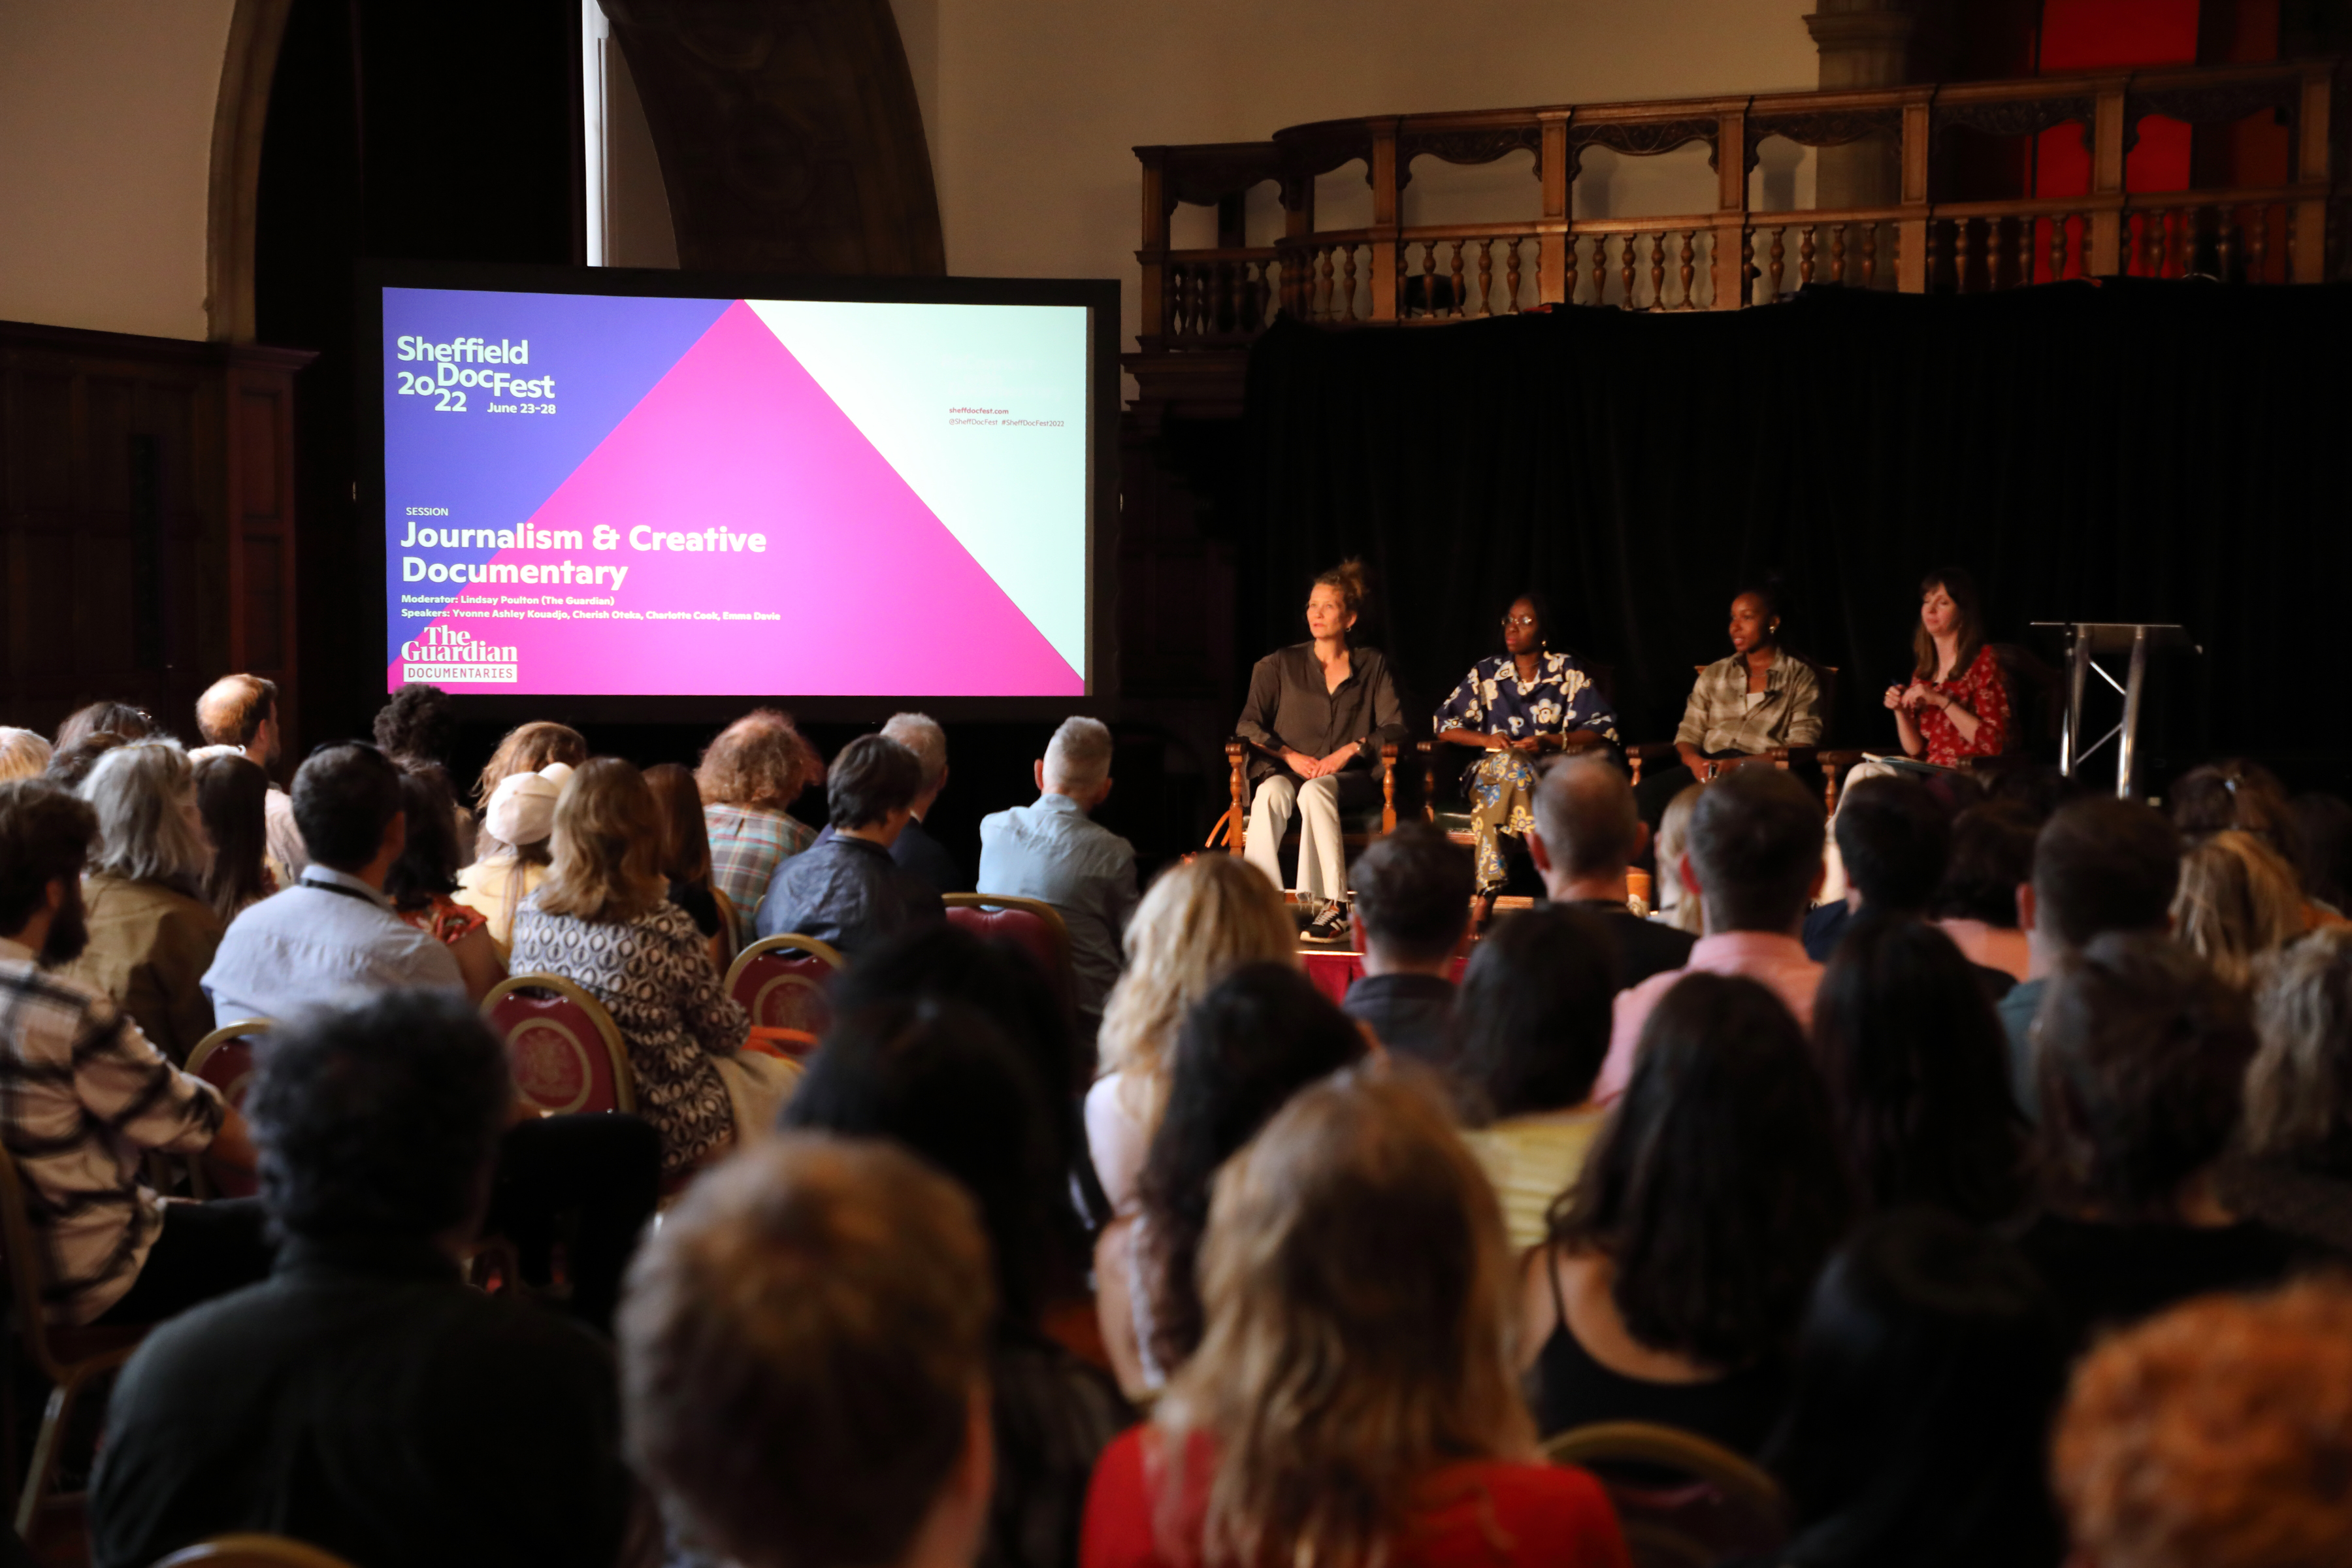 Image taken from the back of a full room showing people sat down, looking towards a stage where four panellists sit facing the crowd. To the left of the image is a large screen with a slide that reads: Journalism and Creative Documentary.